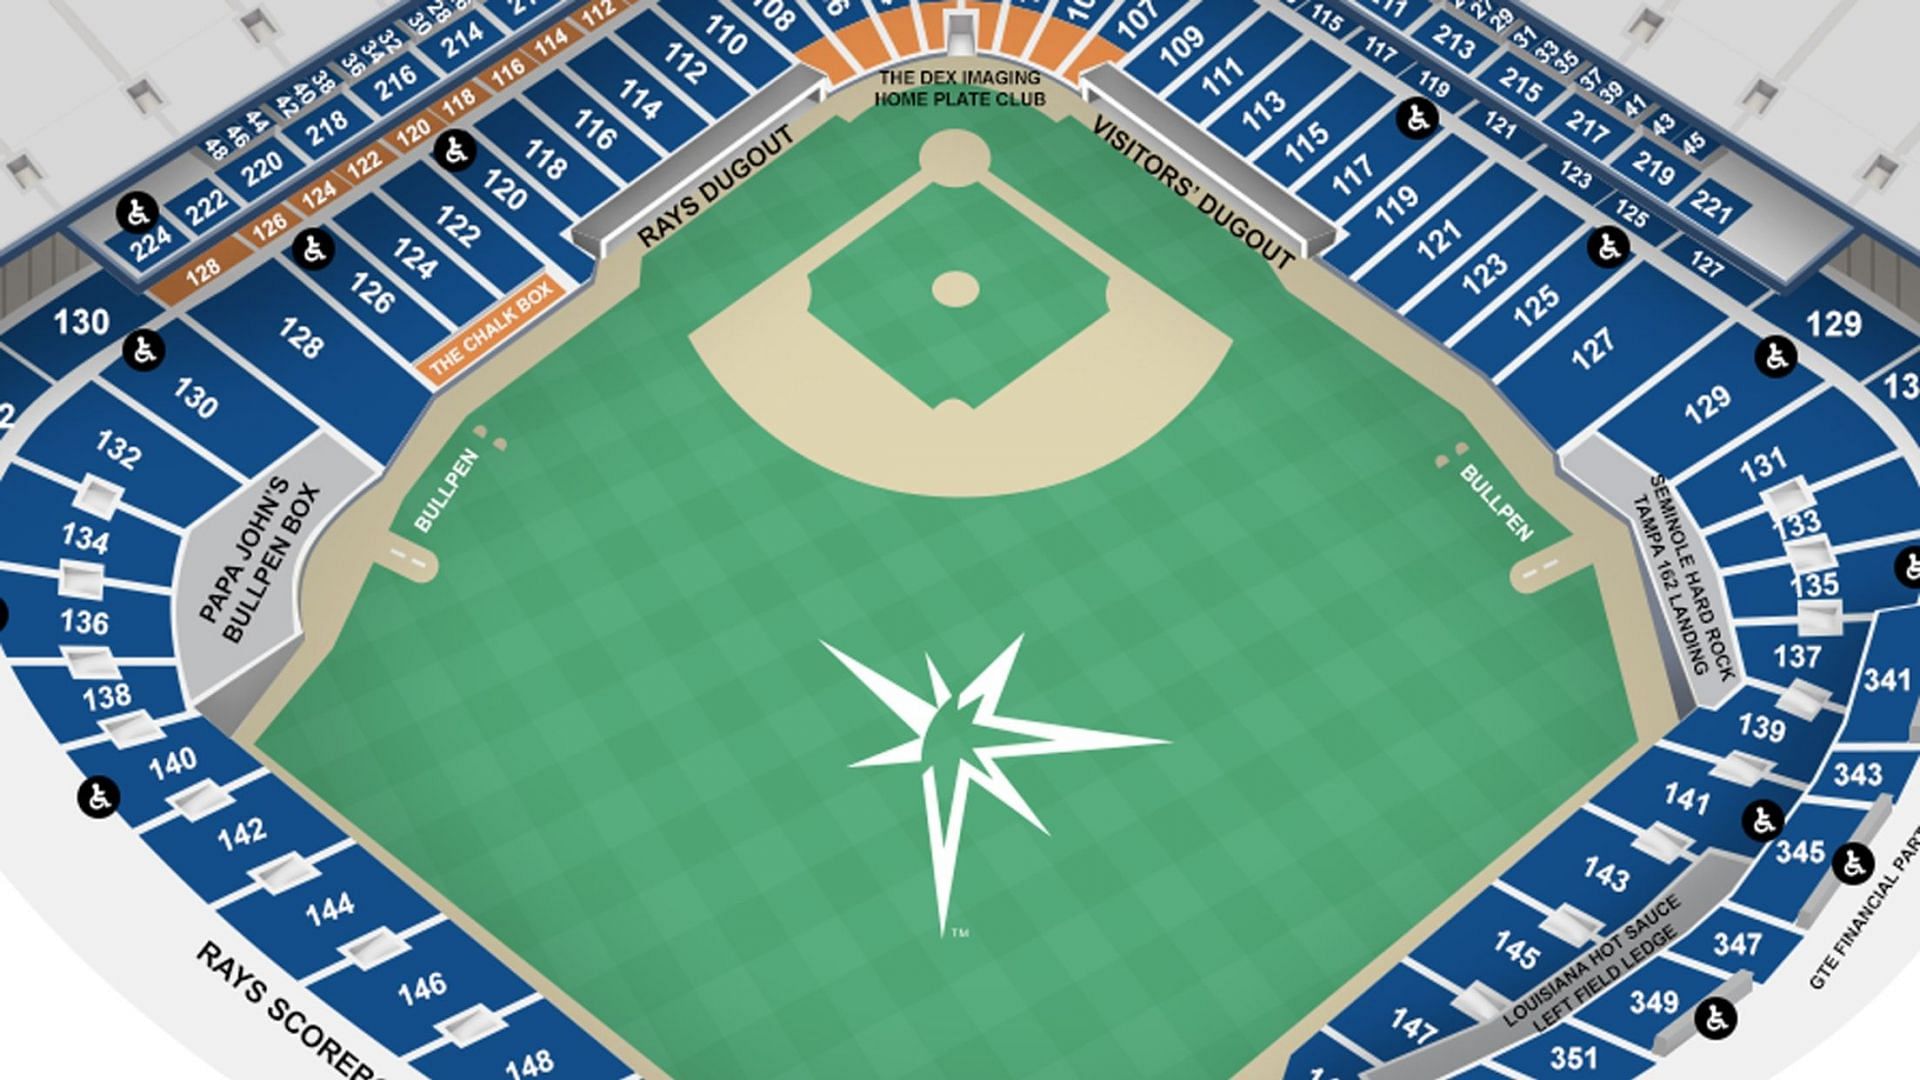 Seating Plan inside the Tropicana Field